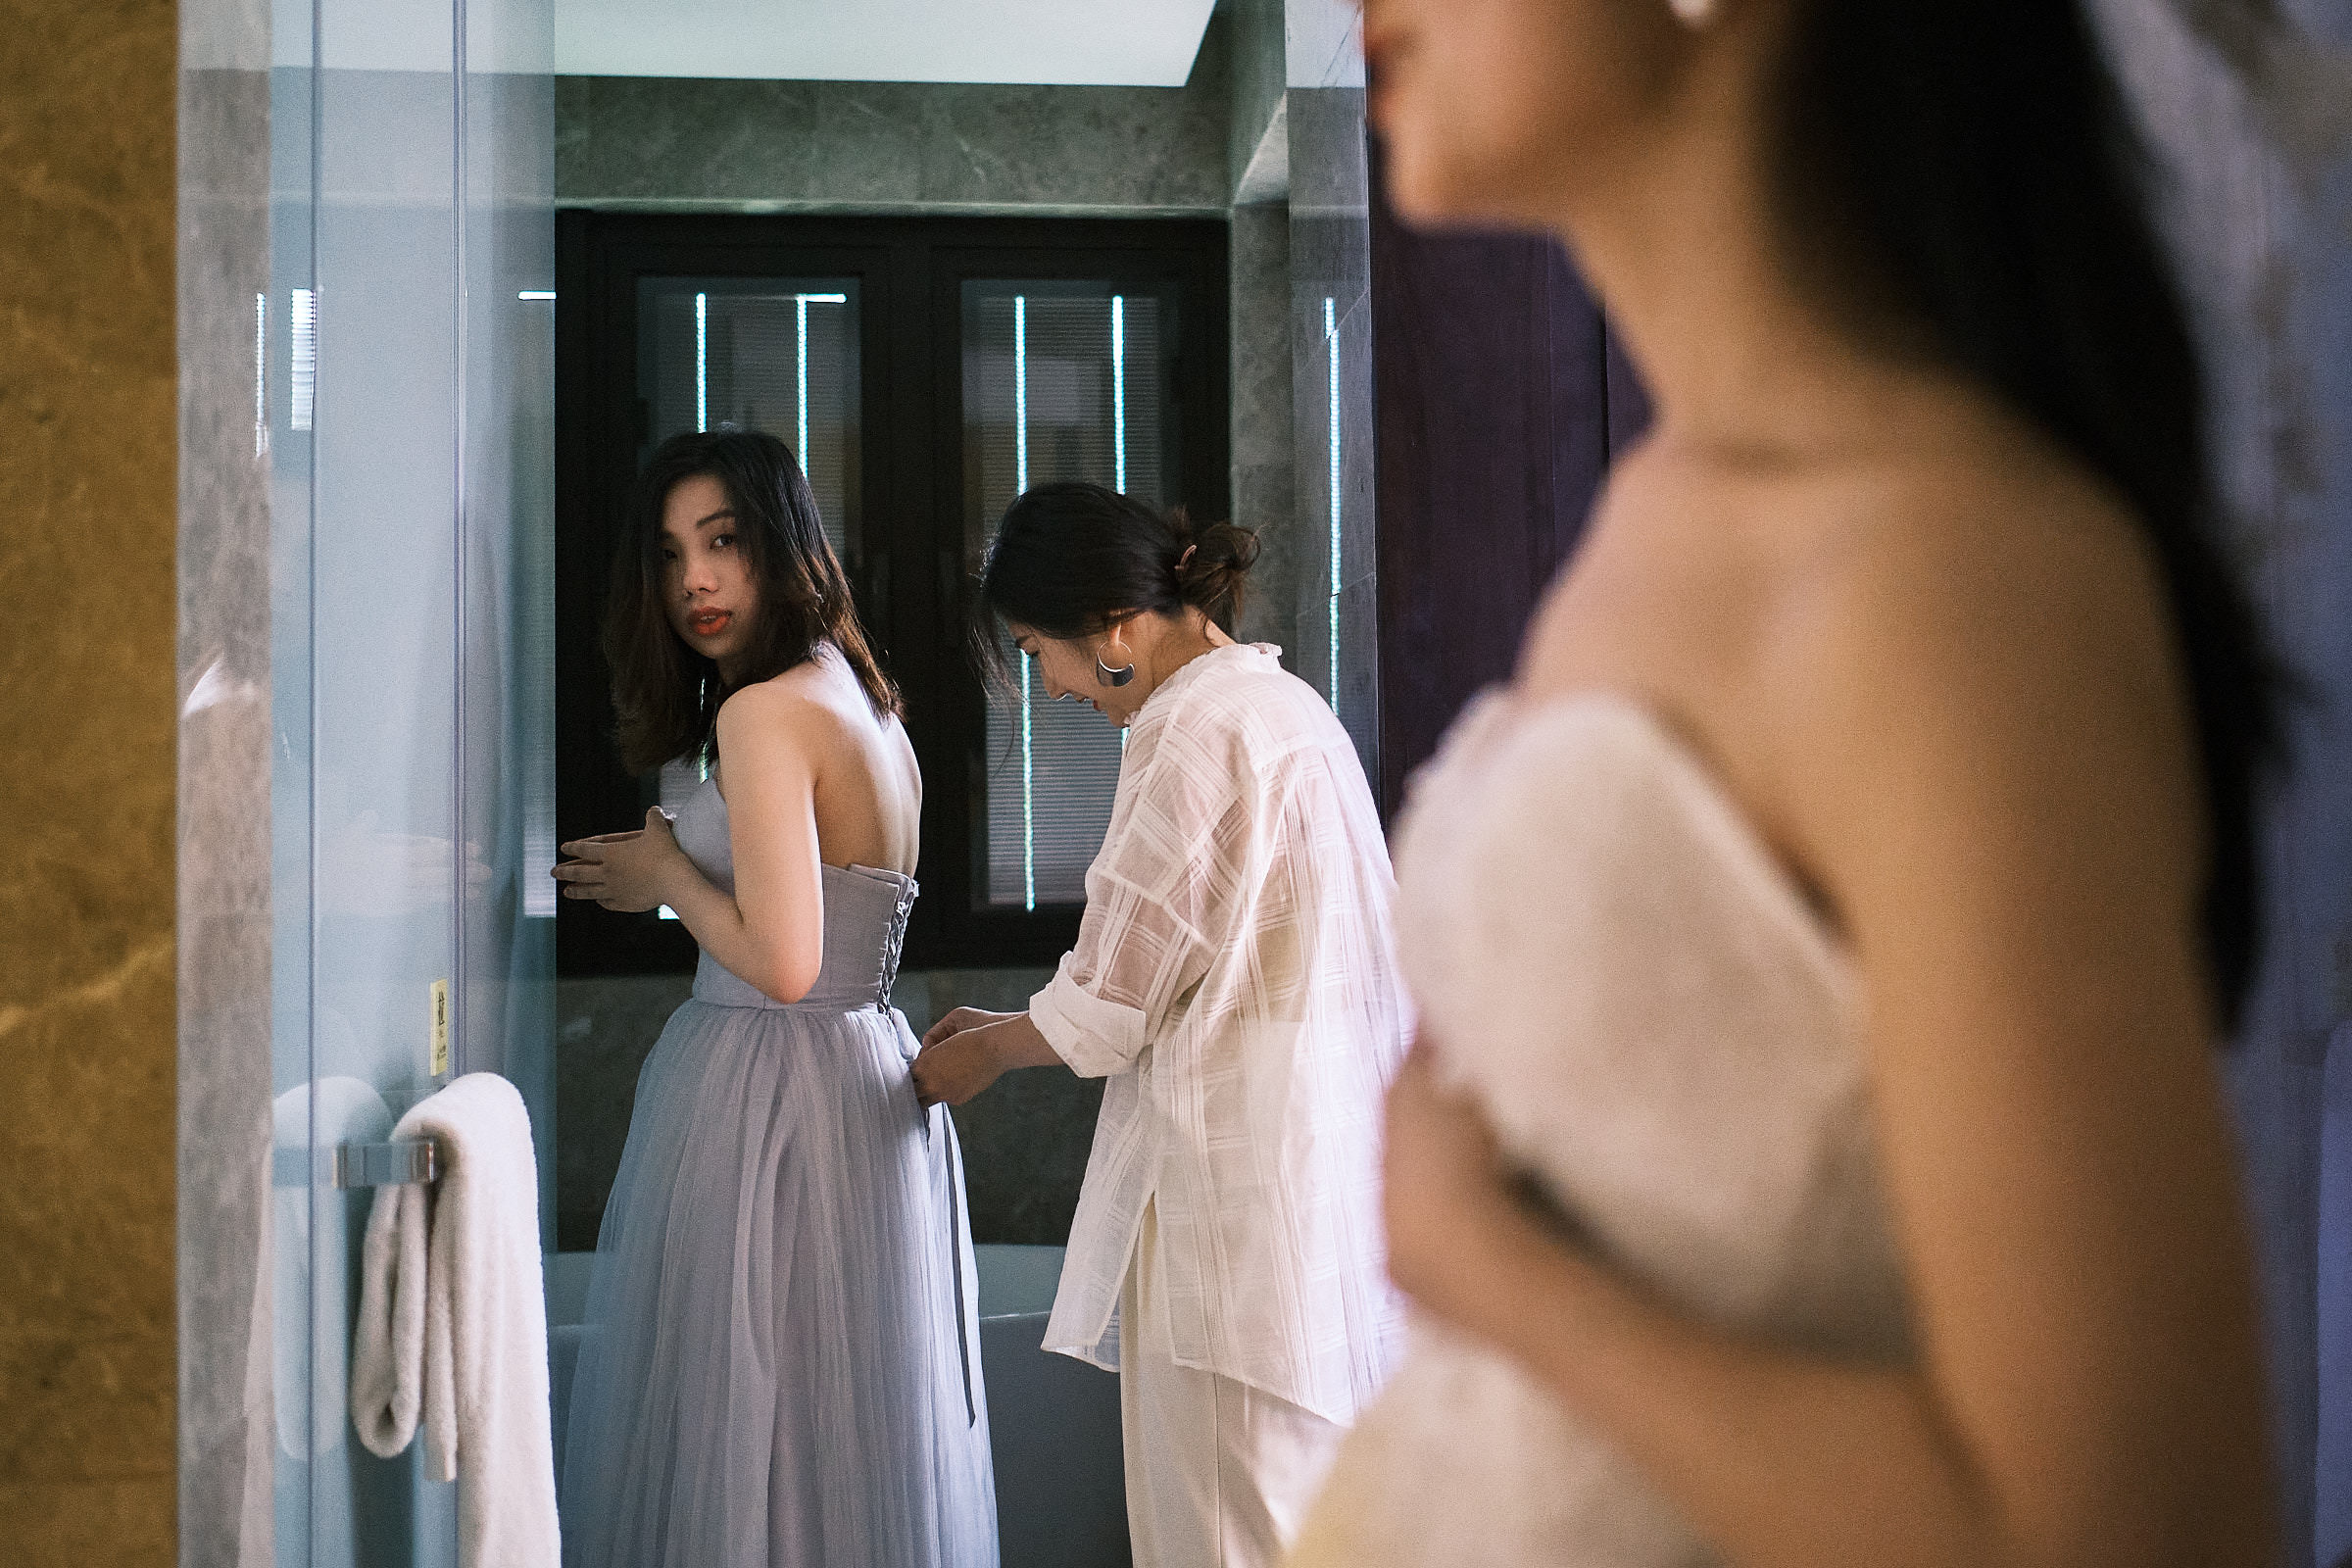 Bride And Bridemsaid Puts On Dress For The Wedding In Hangzhou China